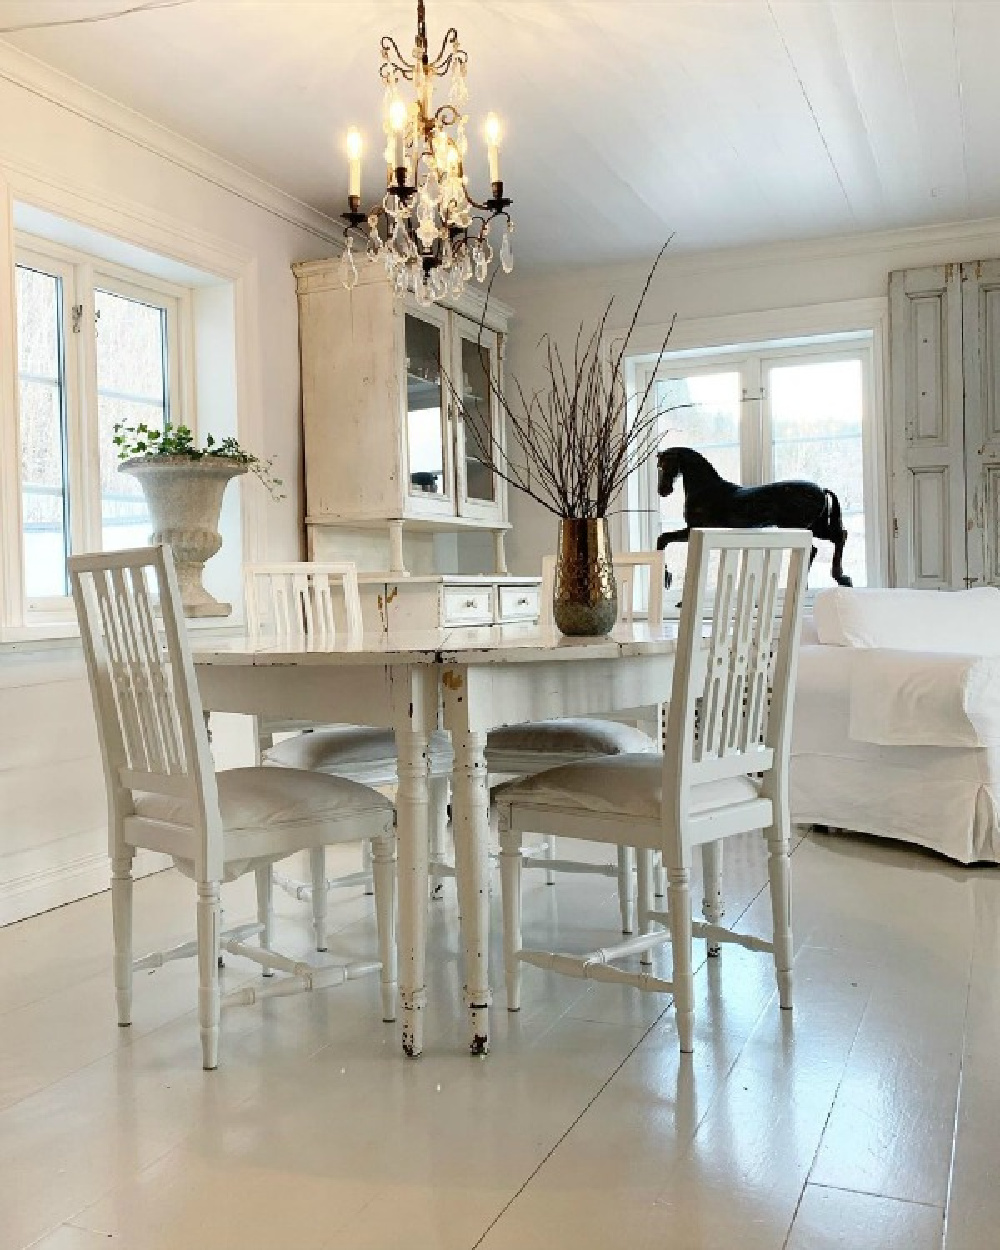 Charming all white dining room with white painted floors and French Nordic decor by Cathrine Aust. #frenchnordic #diningroom #allwhitedecor #scandinaviandesign